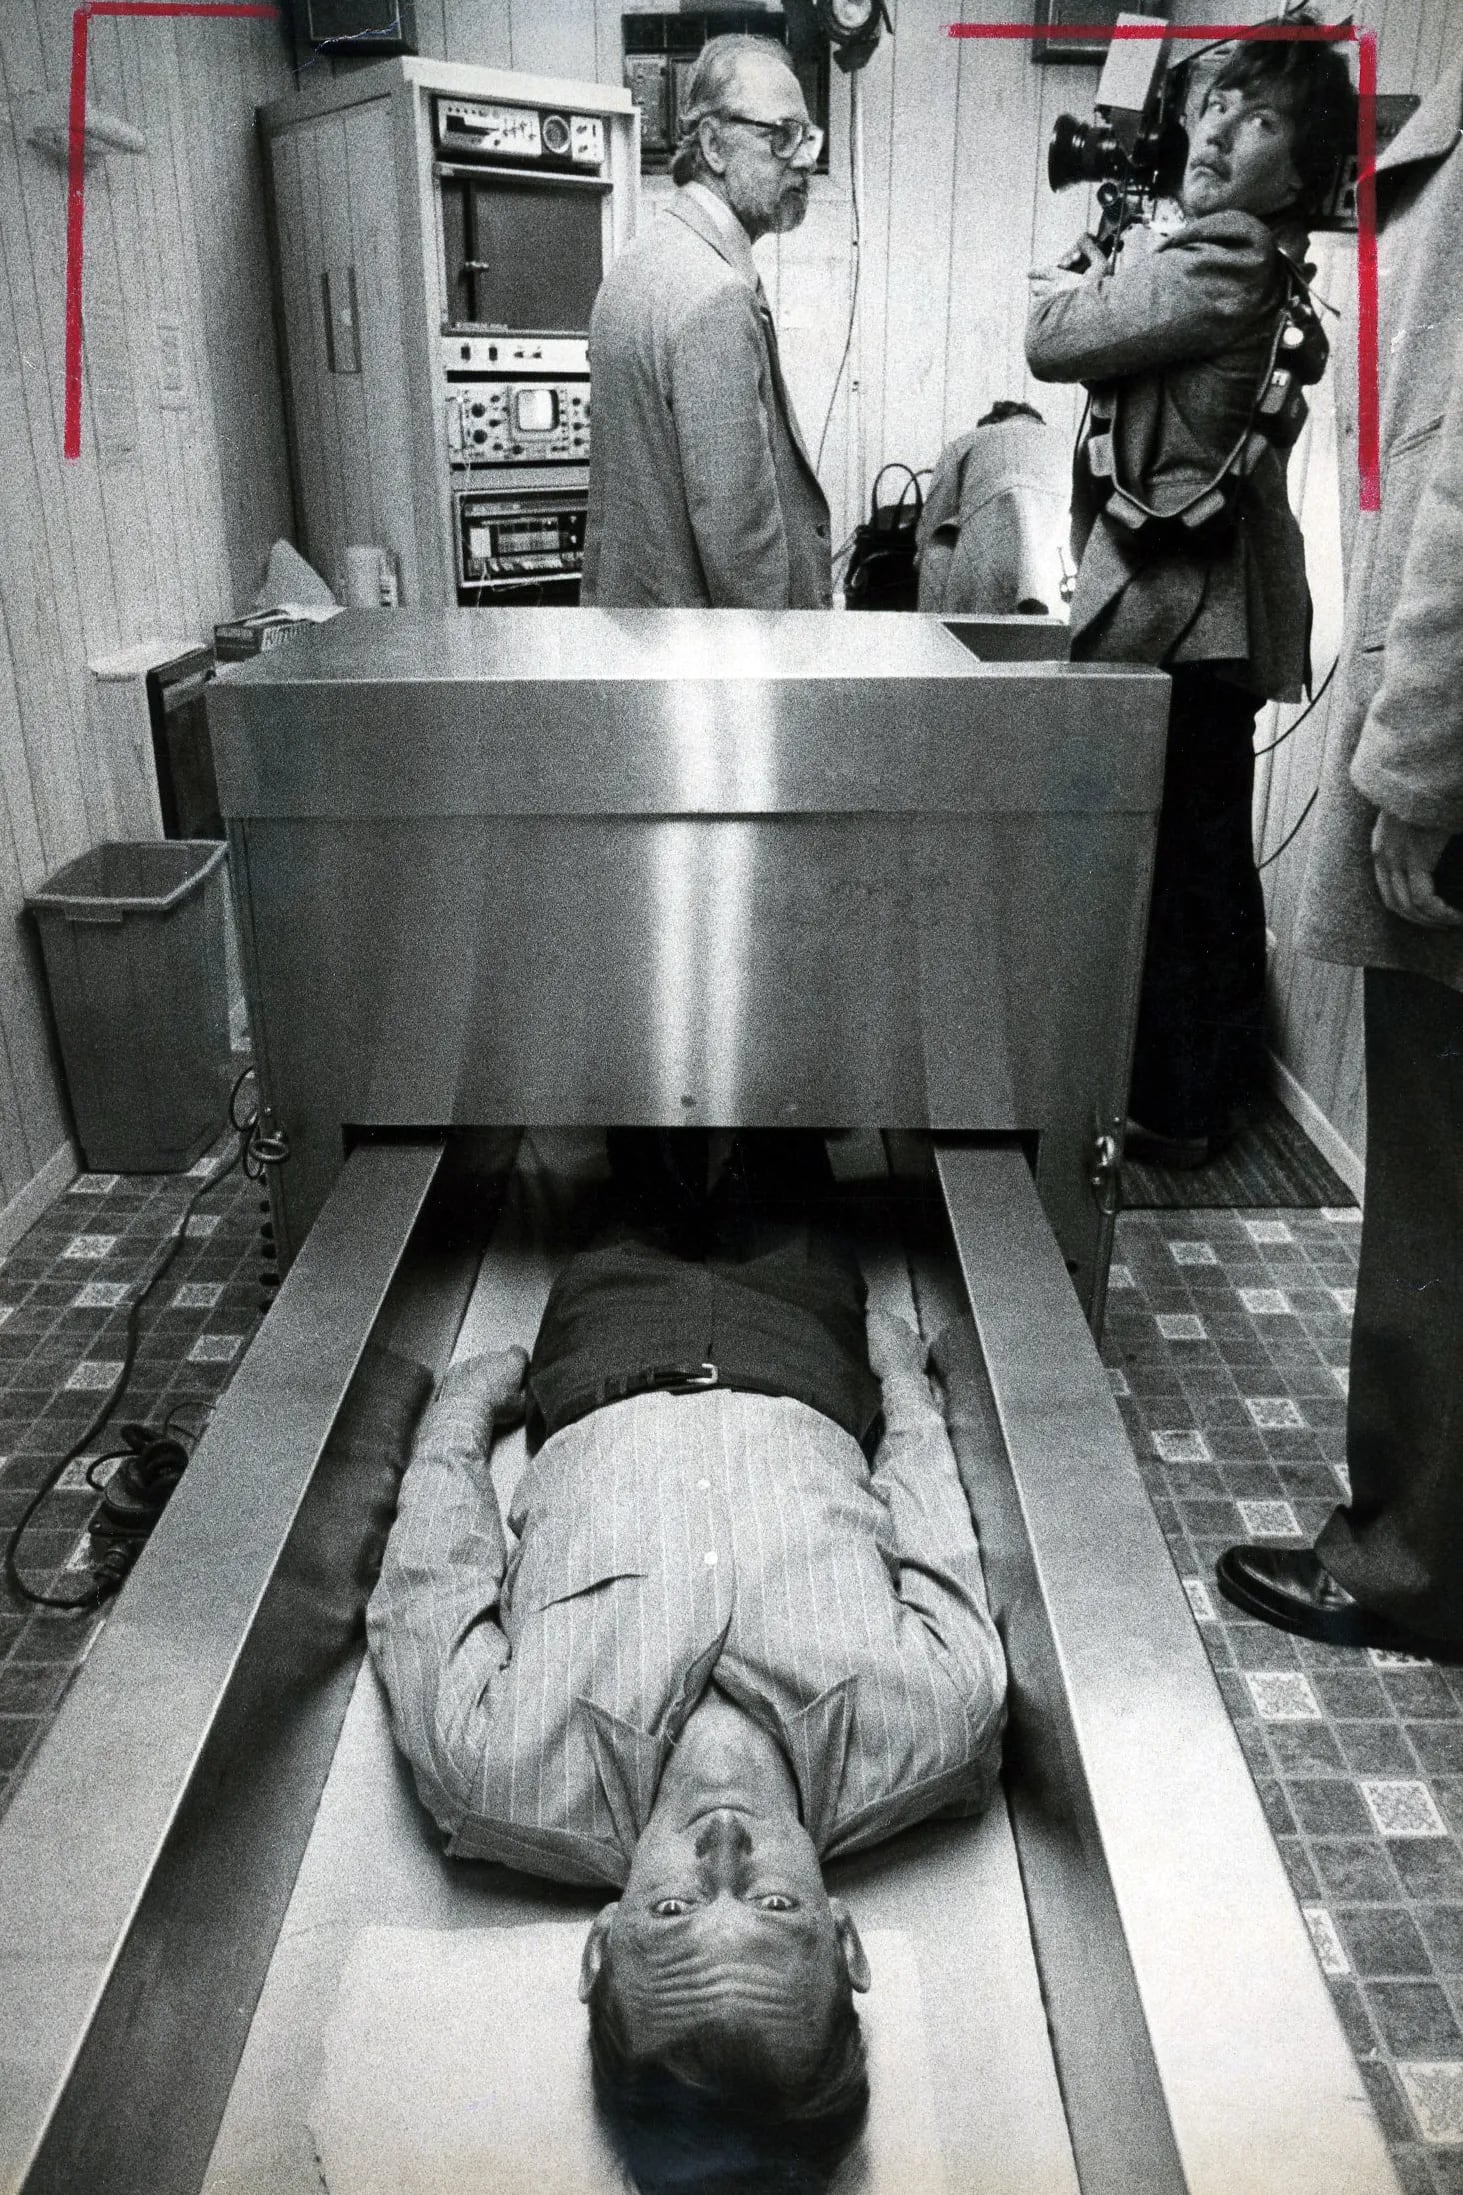 Dairy farmer Richard Alwine, from Middletown, Pa., is scanned for radiation detection on April 11, 1979, after the accident at Three Mile Island.